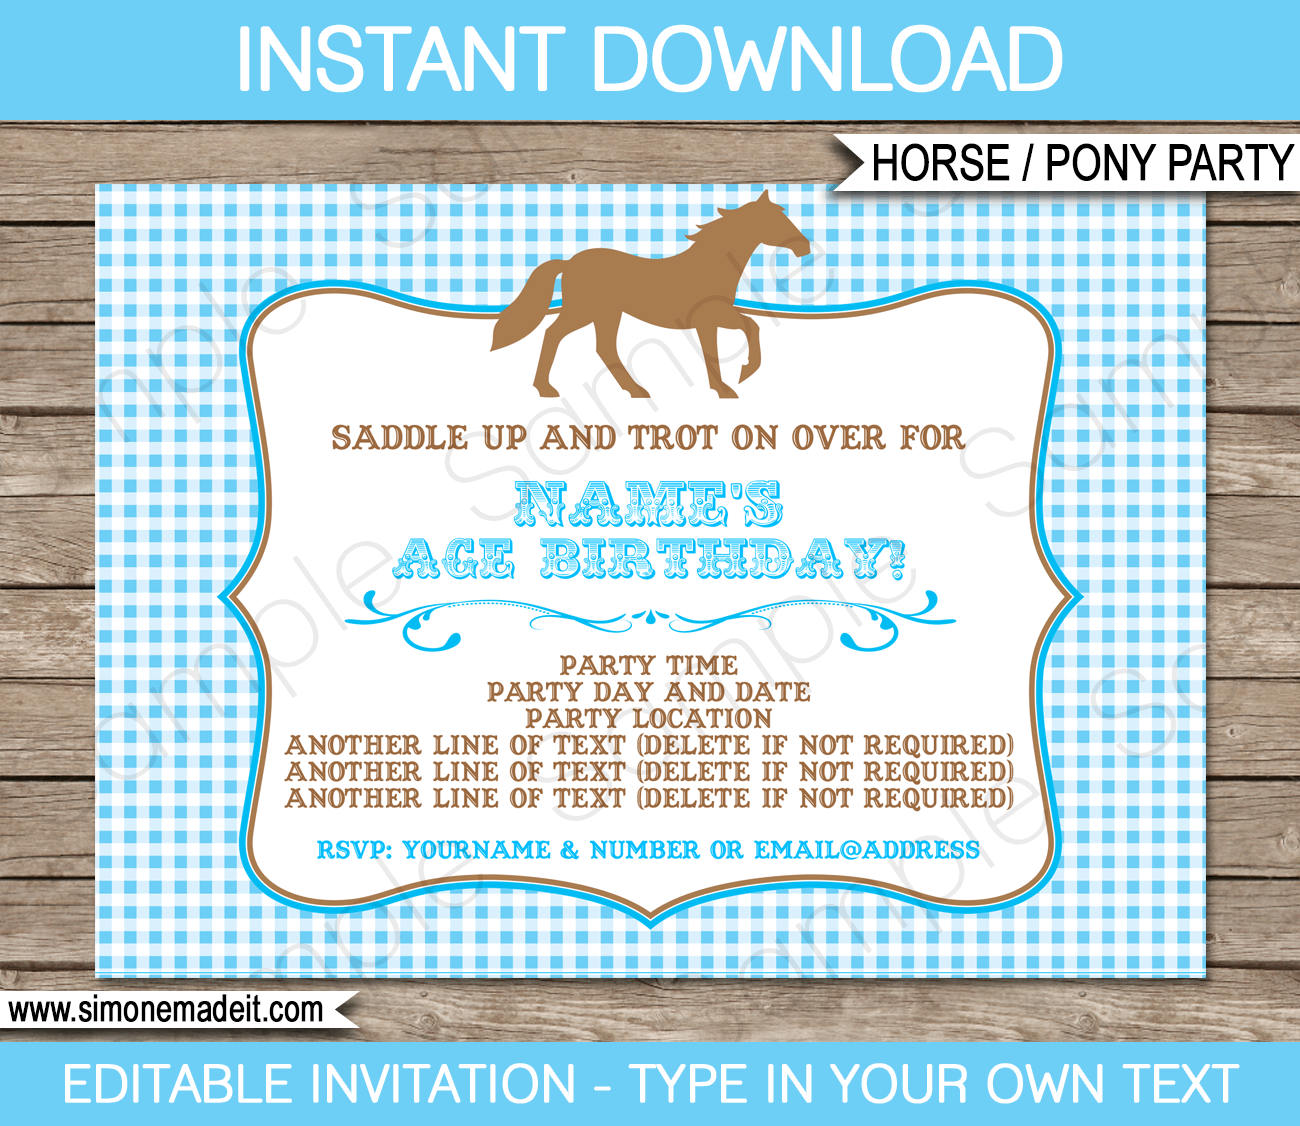 Blue Pony or Horse Party Invitations | Blue | Birthday Party | Editable & Printable DIY Template | $7.50 INSTANT DOWNLOAD via simonemadeit.com 